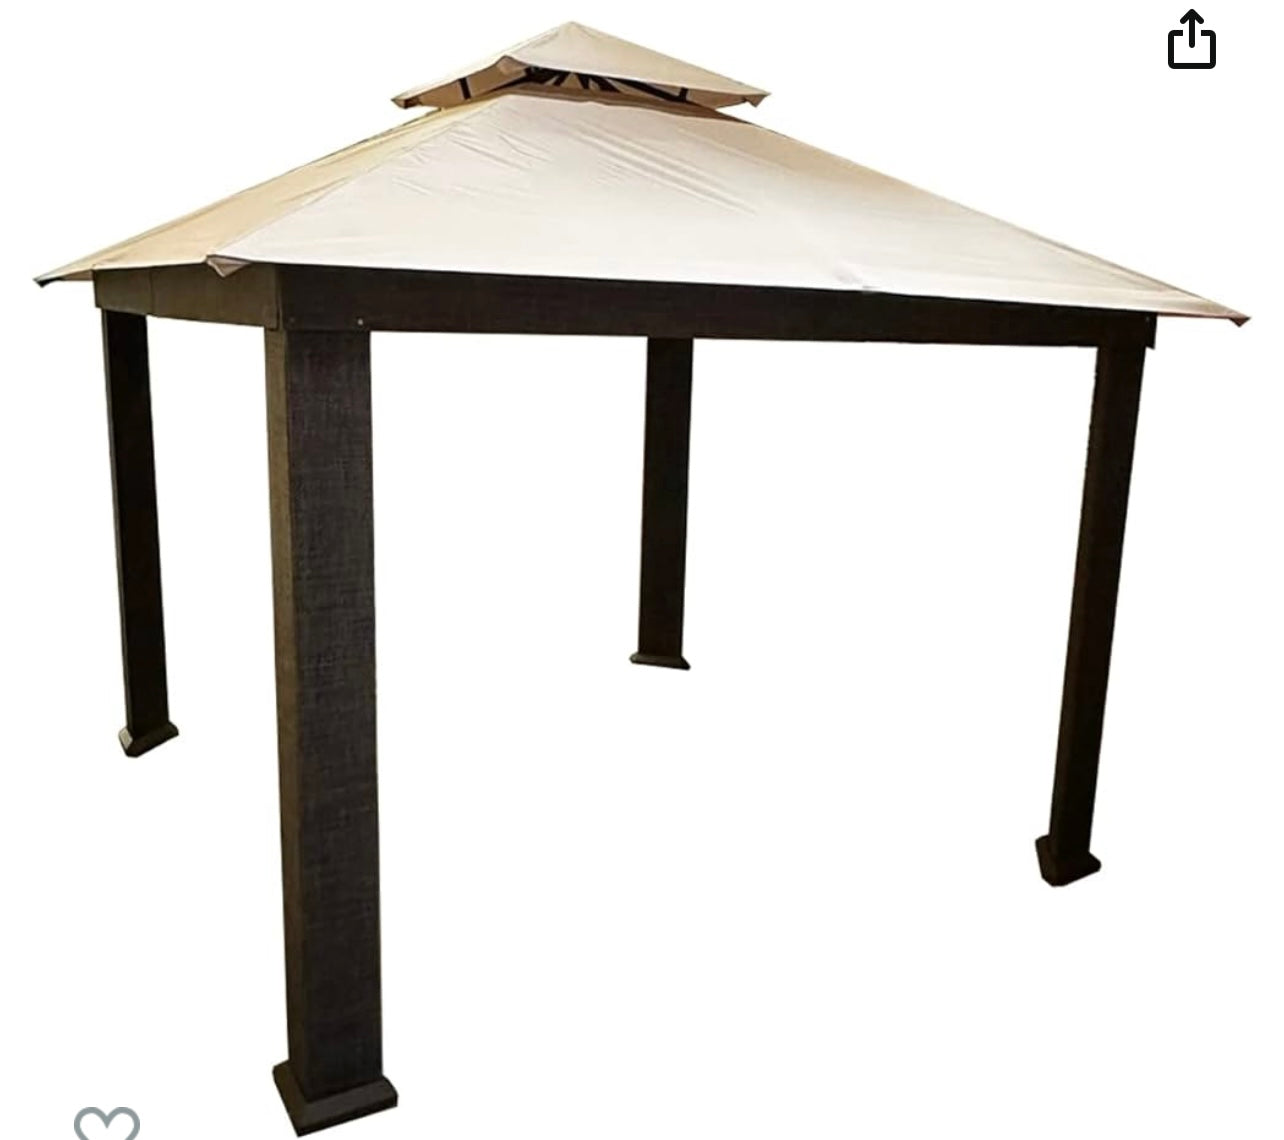 Replacement Canopy Top Cover Compatible with The Eliteshade 12x12 Gazebo - RipLock 500